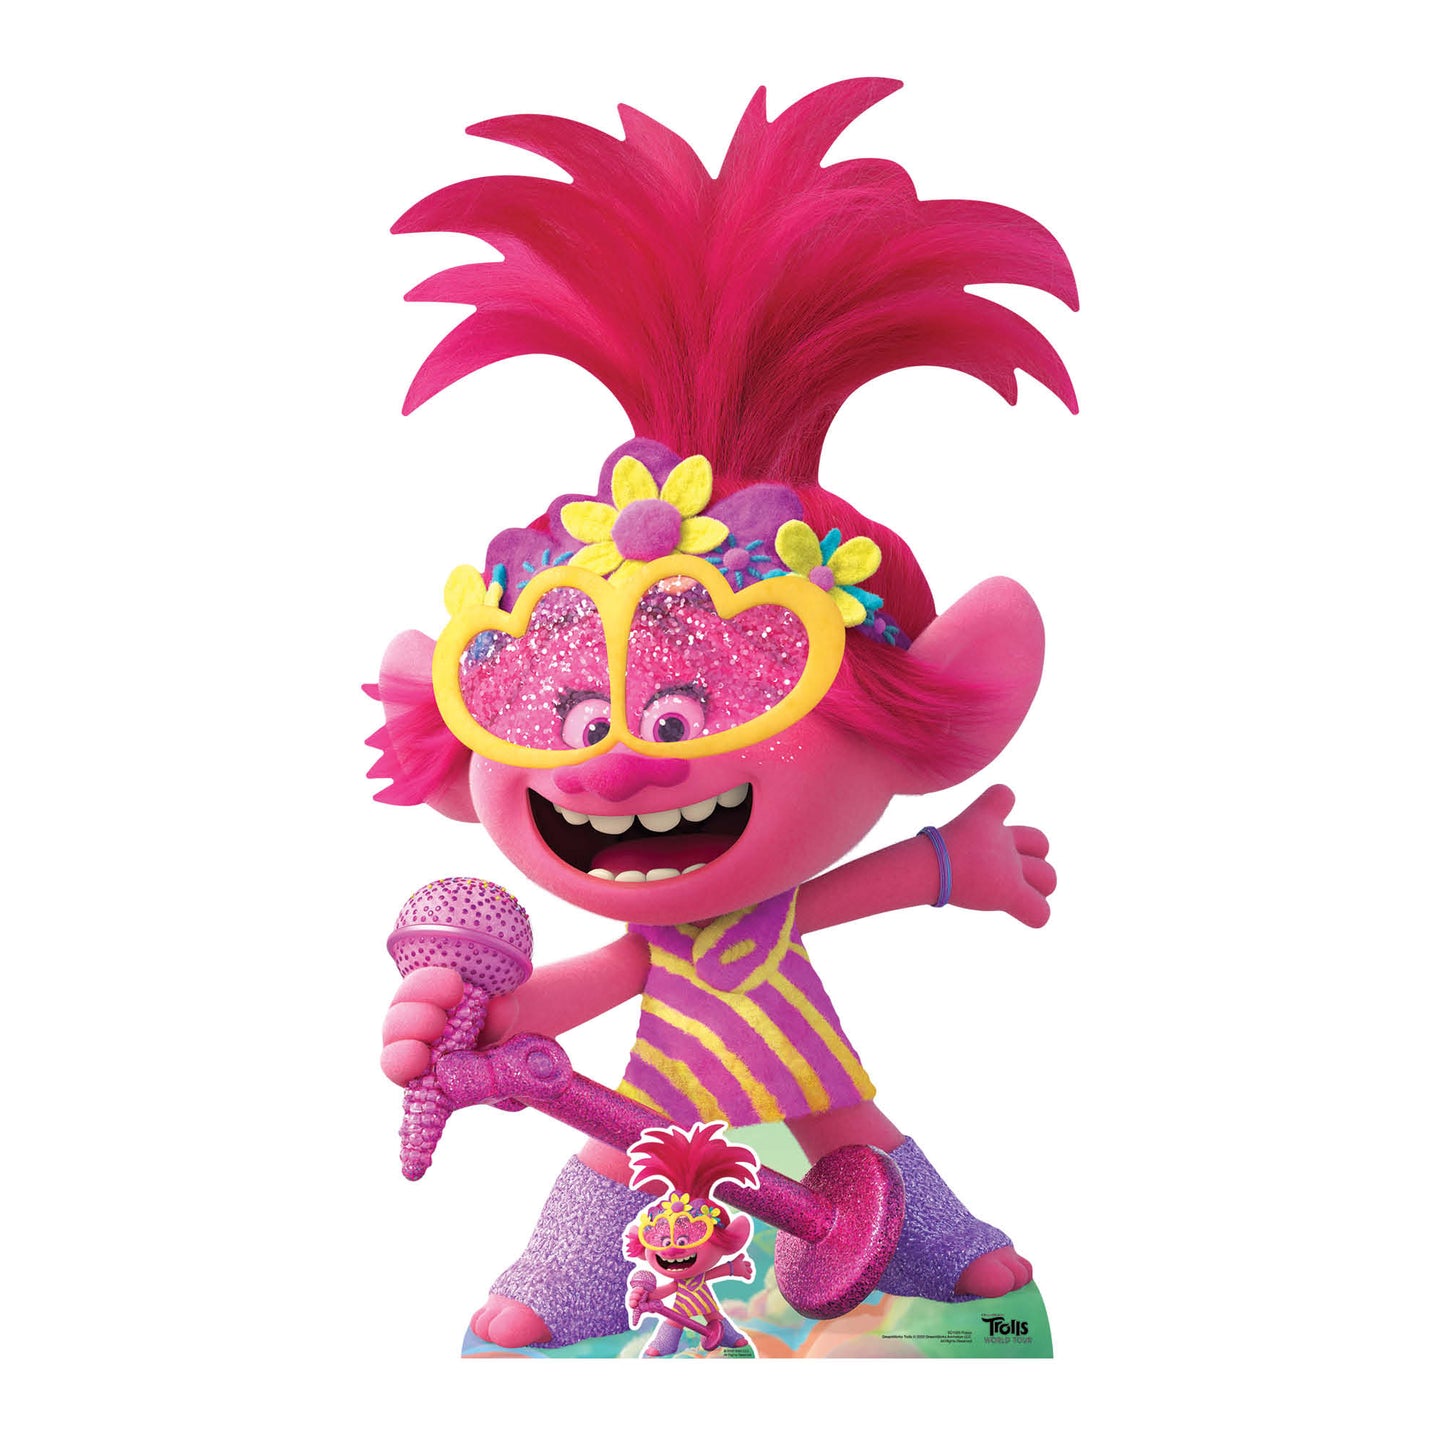 SC1526 Poppy LARGE Microphone Singing Trolls World Tour Cardboard Cut Out Height 157cm